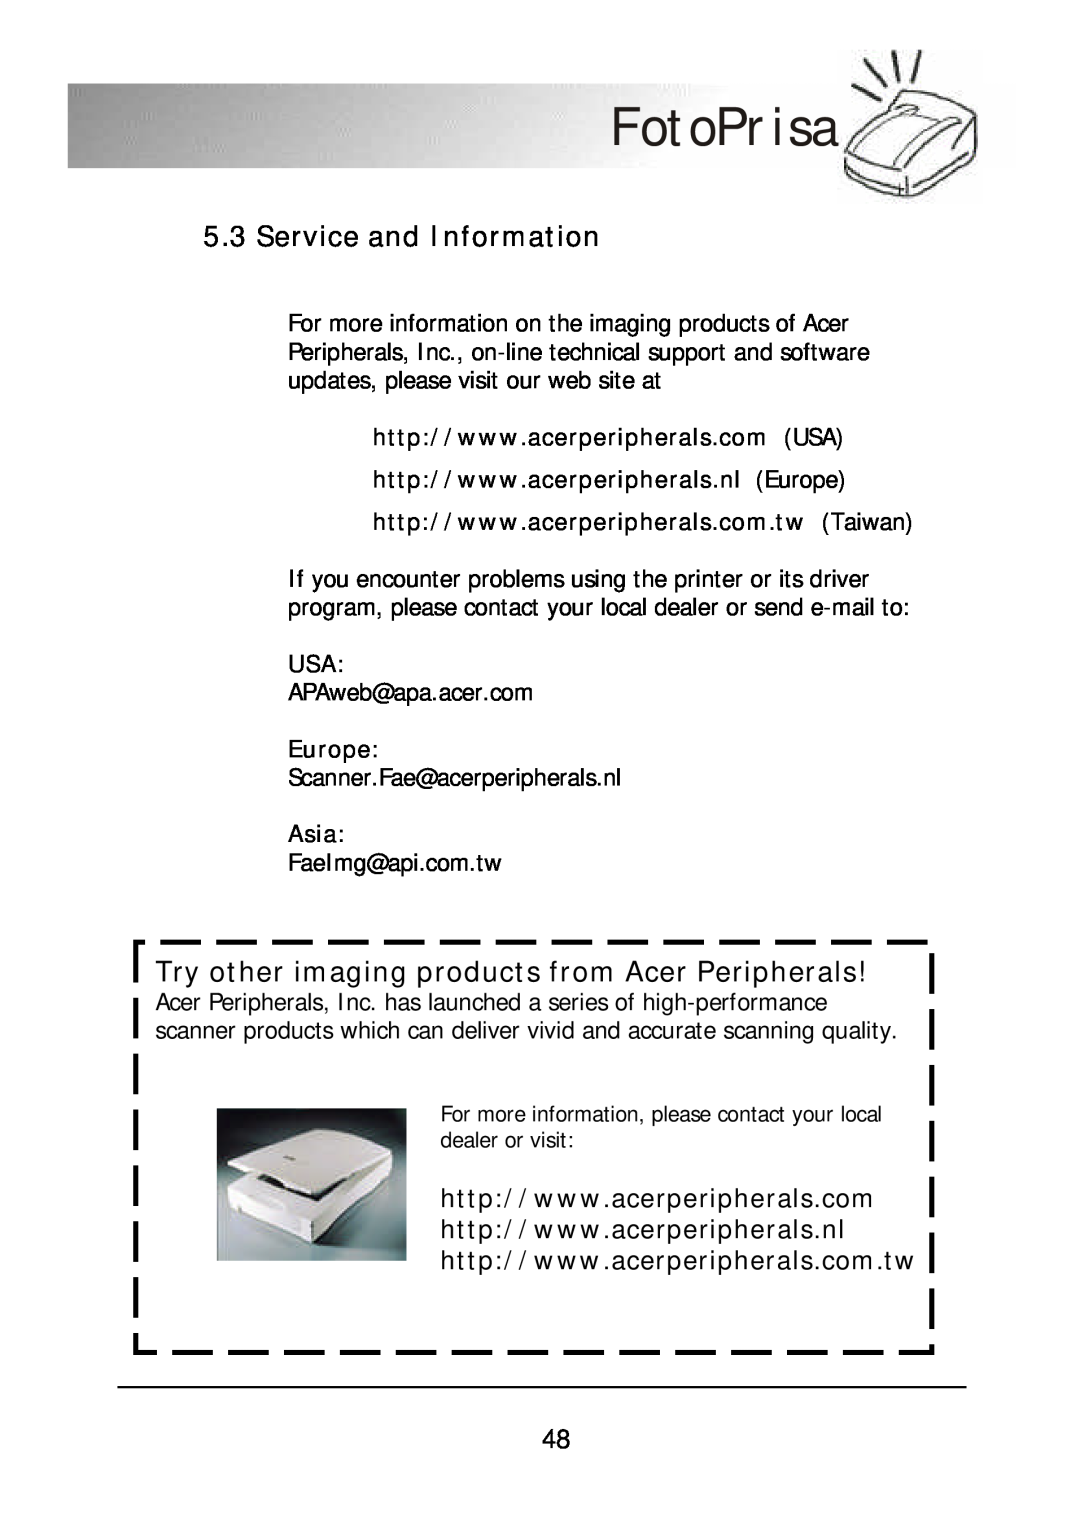 Acer 300P user manual Service and Information, Try other imaging products from Acer Peripherals, Europe, Asia, FotoPrisa 